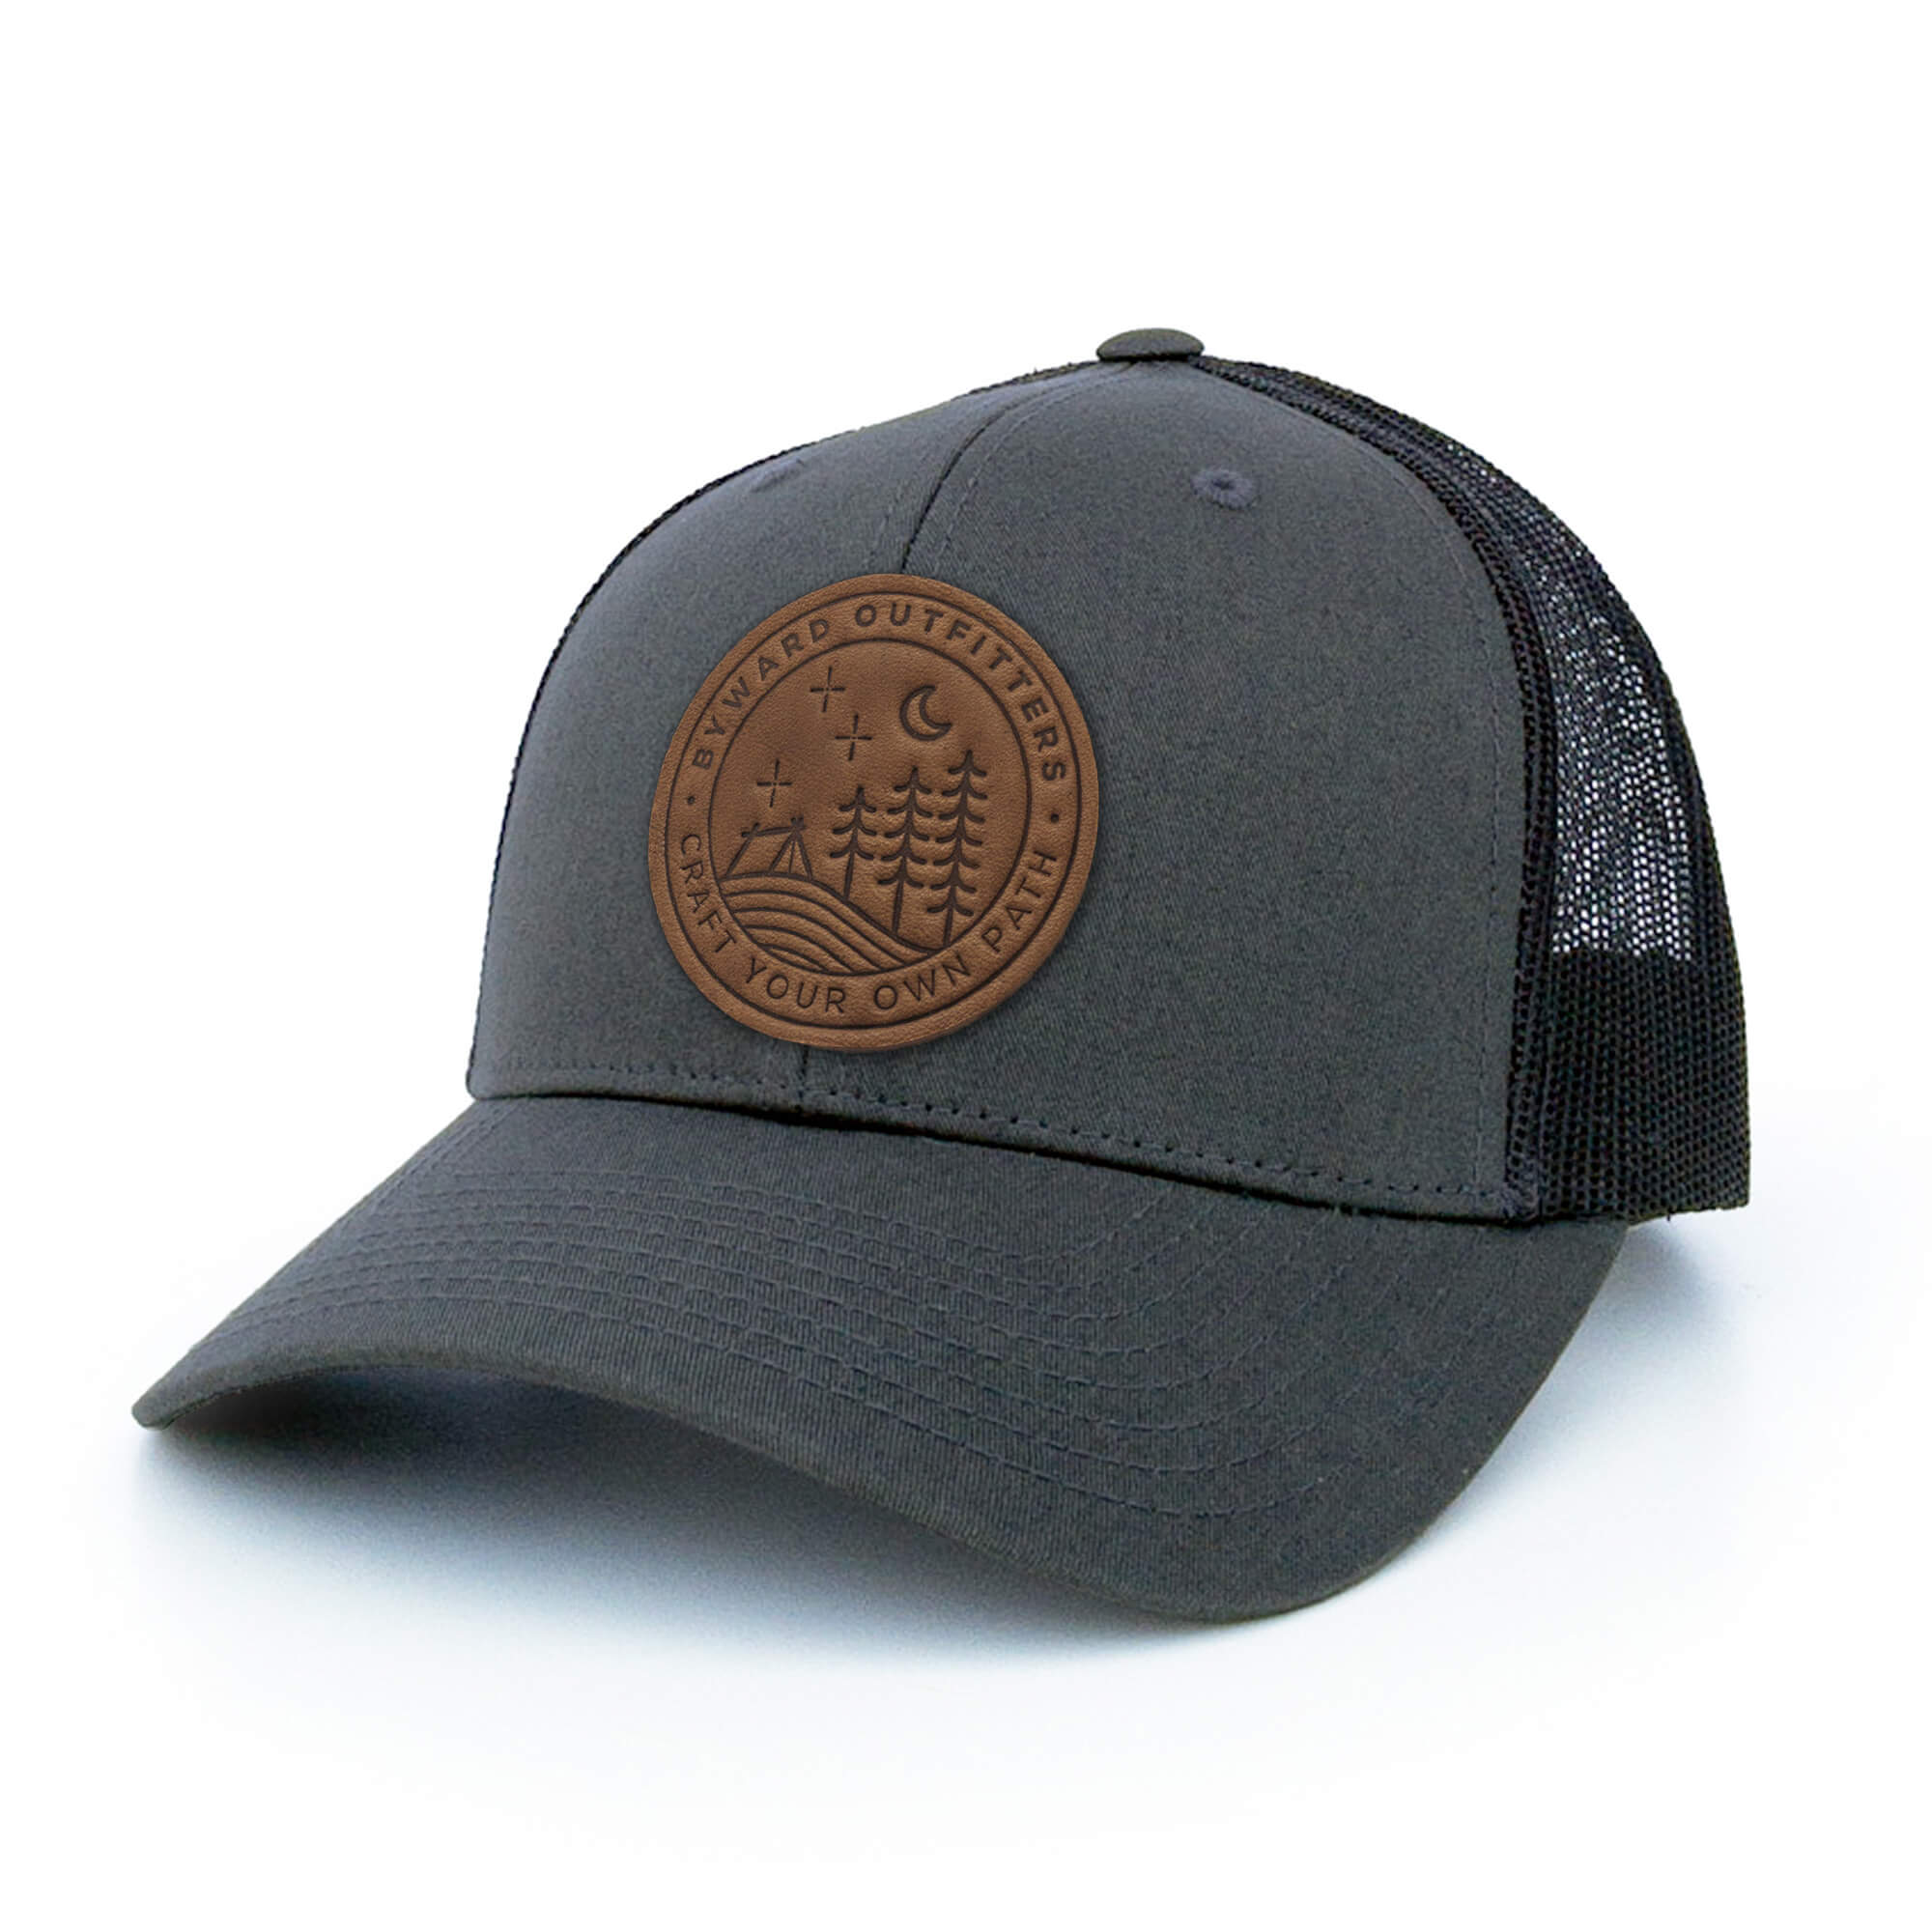 Charcoal trucker hat with full-grain leather patch of Stellar Night | BLACK-005-001, CHARC-005-001, NAVY-005-001, HGREY-005-001, MOSS-005-001, BROWN-005-001